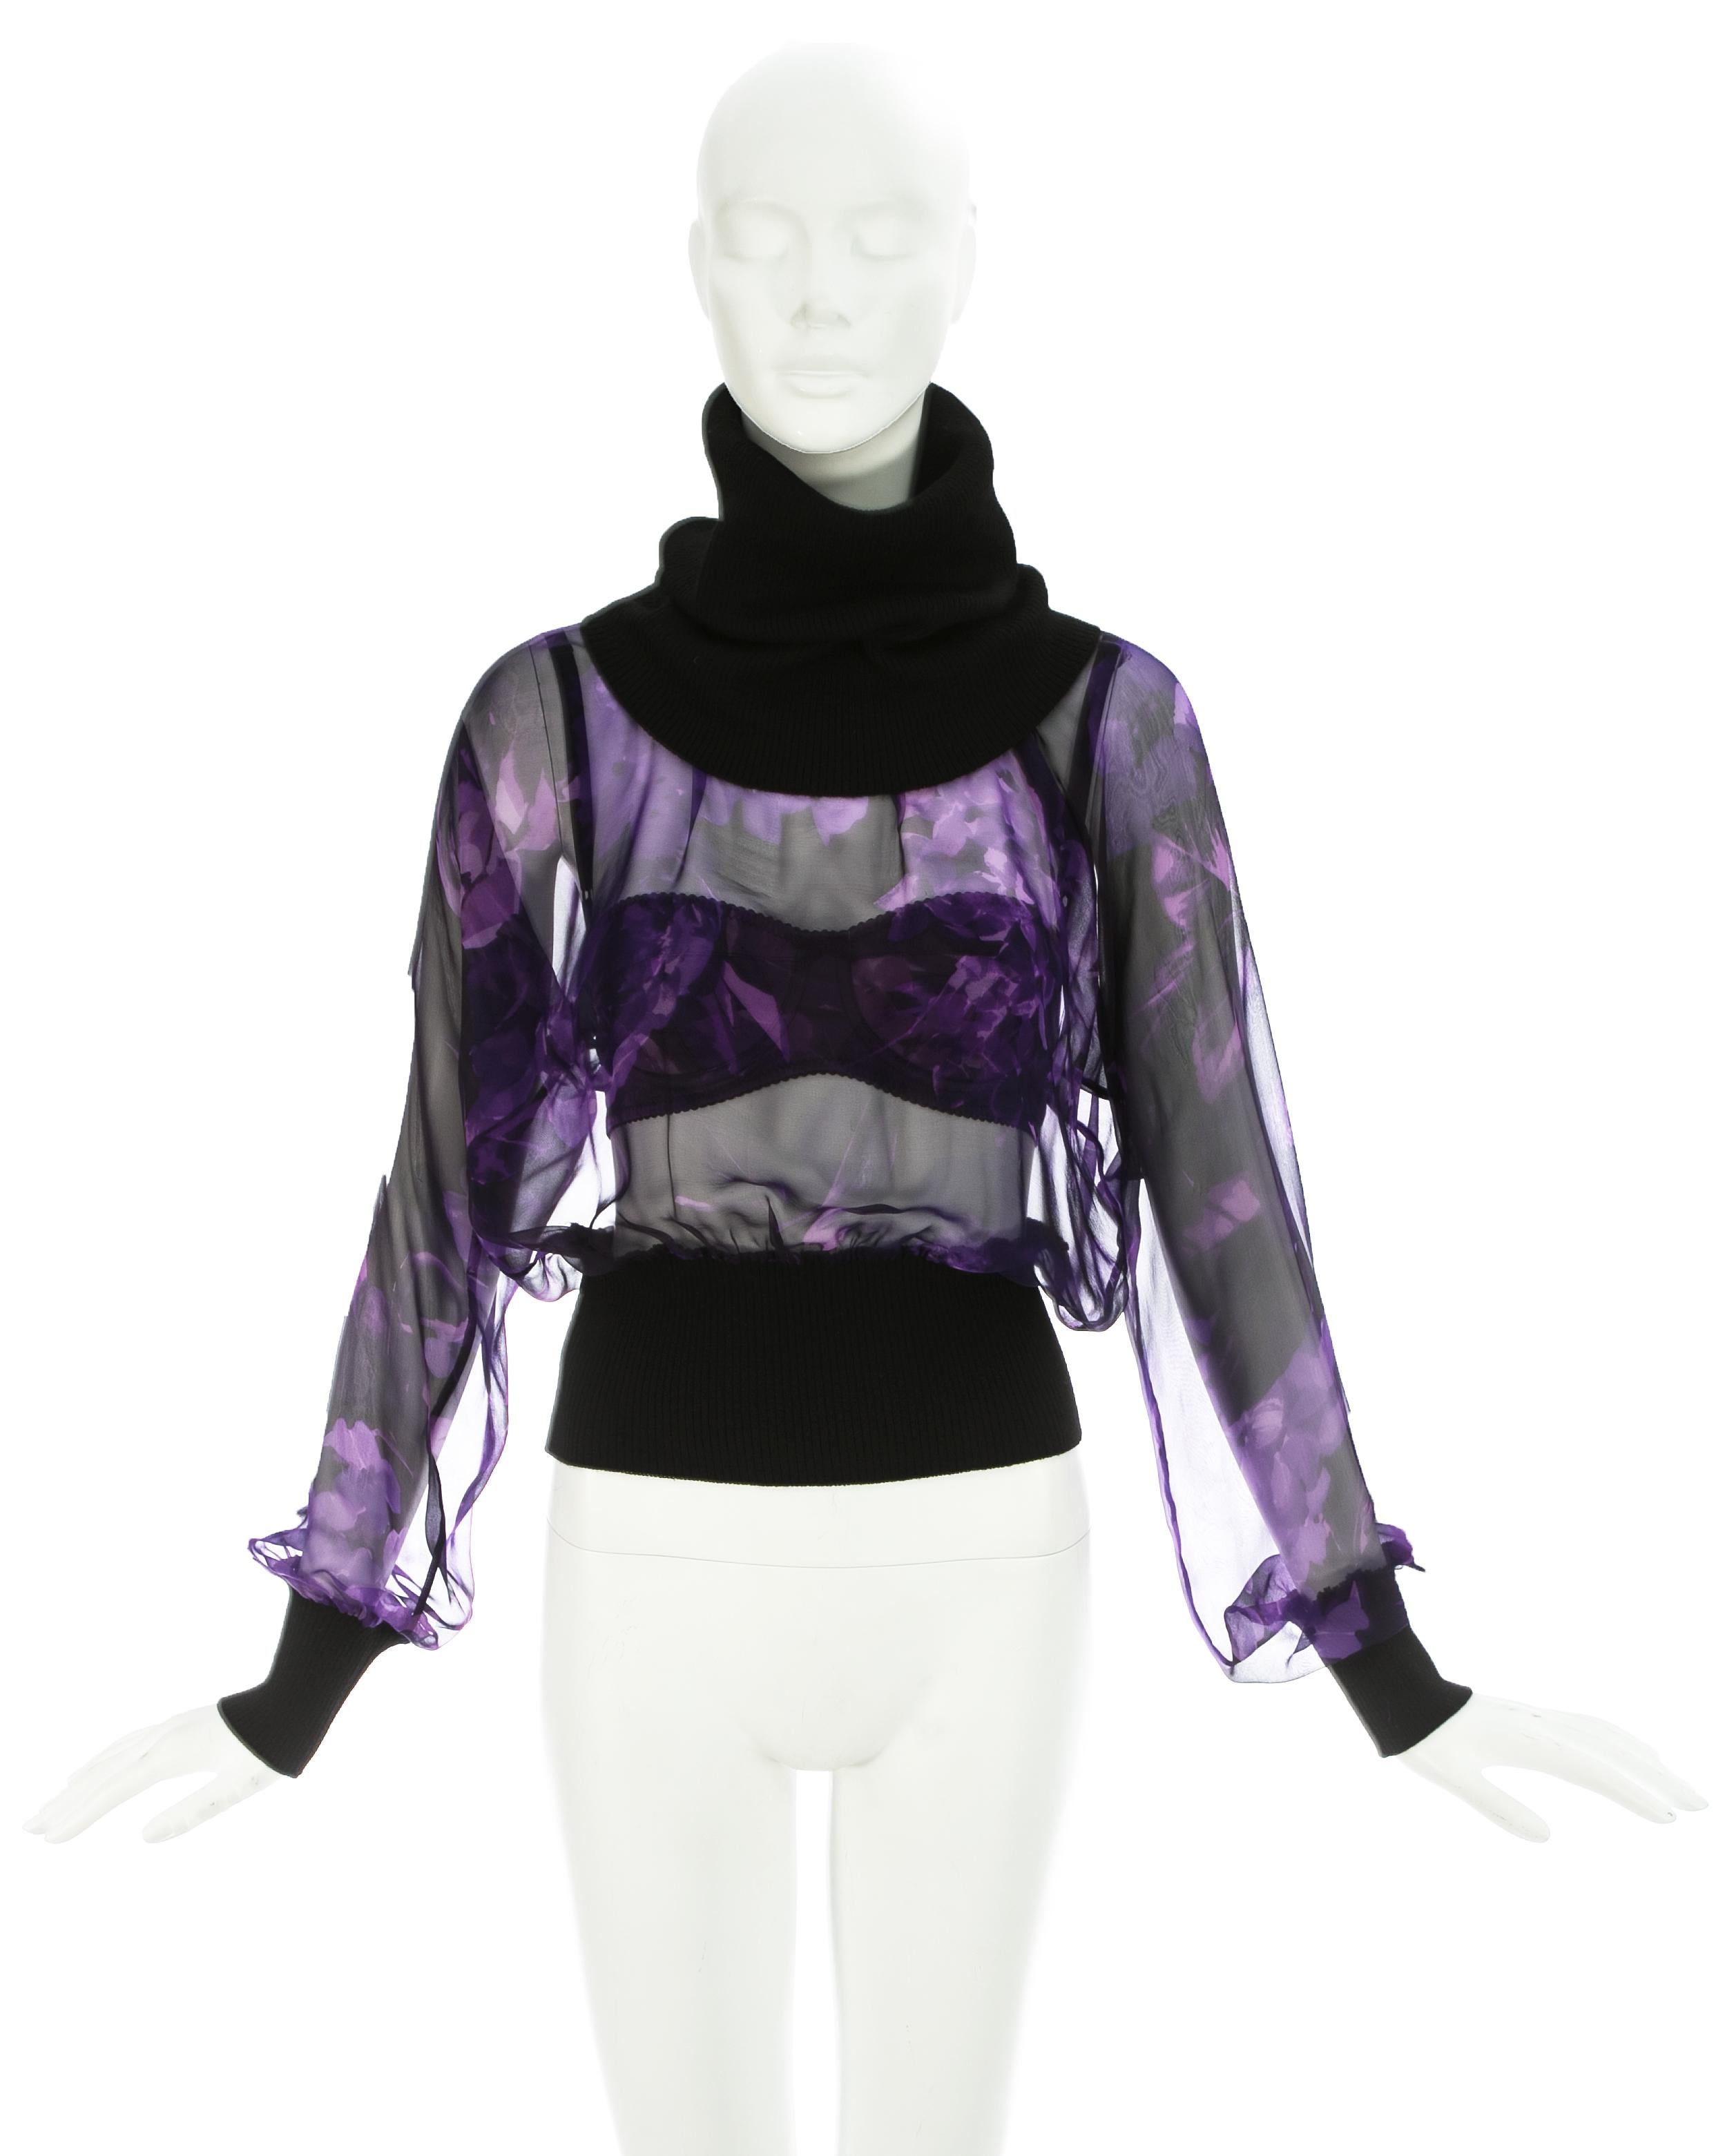 Dolce & Gabbana; Floral purple silk chiffon evening blouse with black wool cuffs and large turtleneck collar. Paired with a matching satin bra with adjustable shoulder straps. 

Fall-Winter 1999

